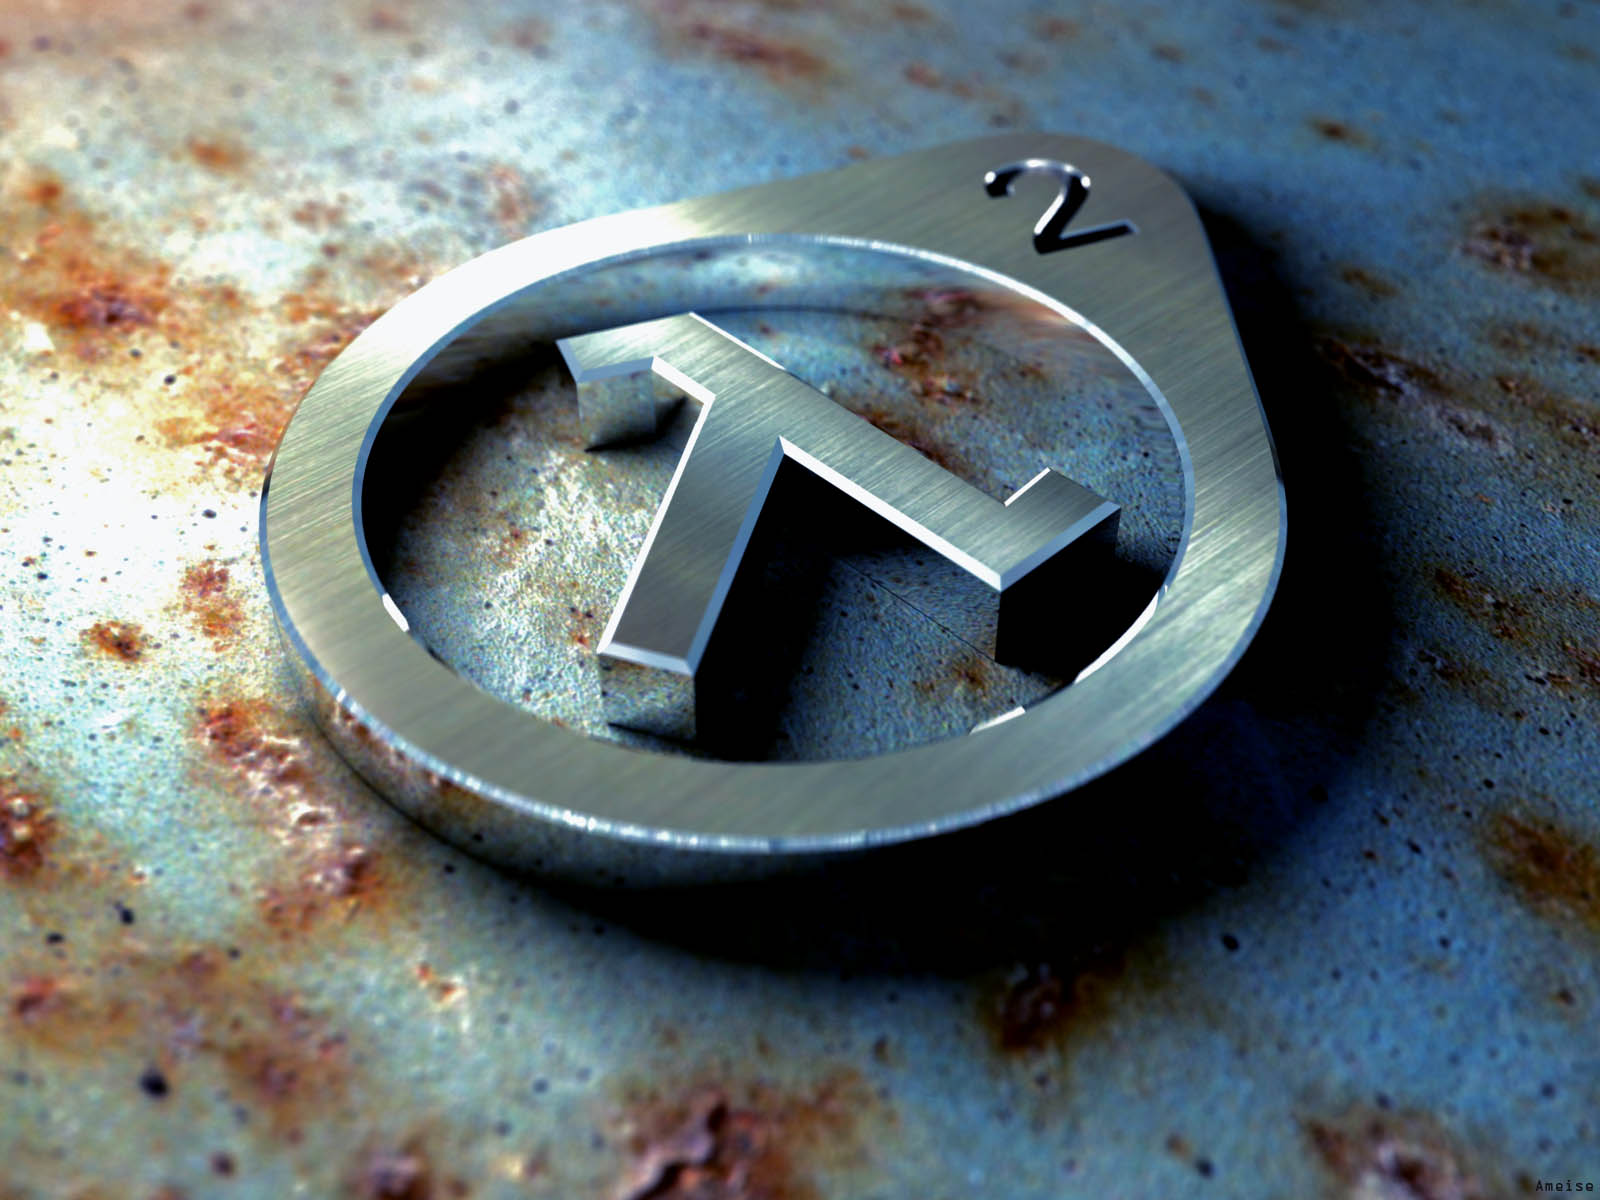  Half Life HD Android Wallpapers